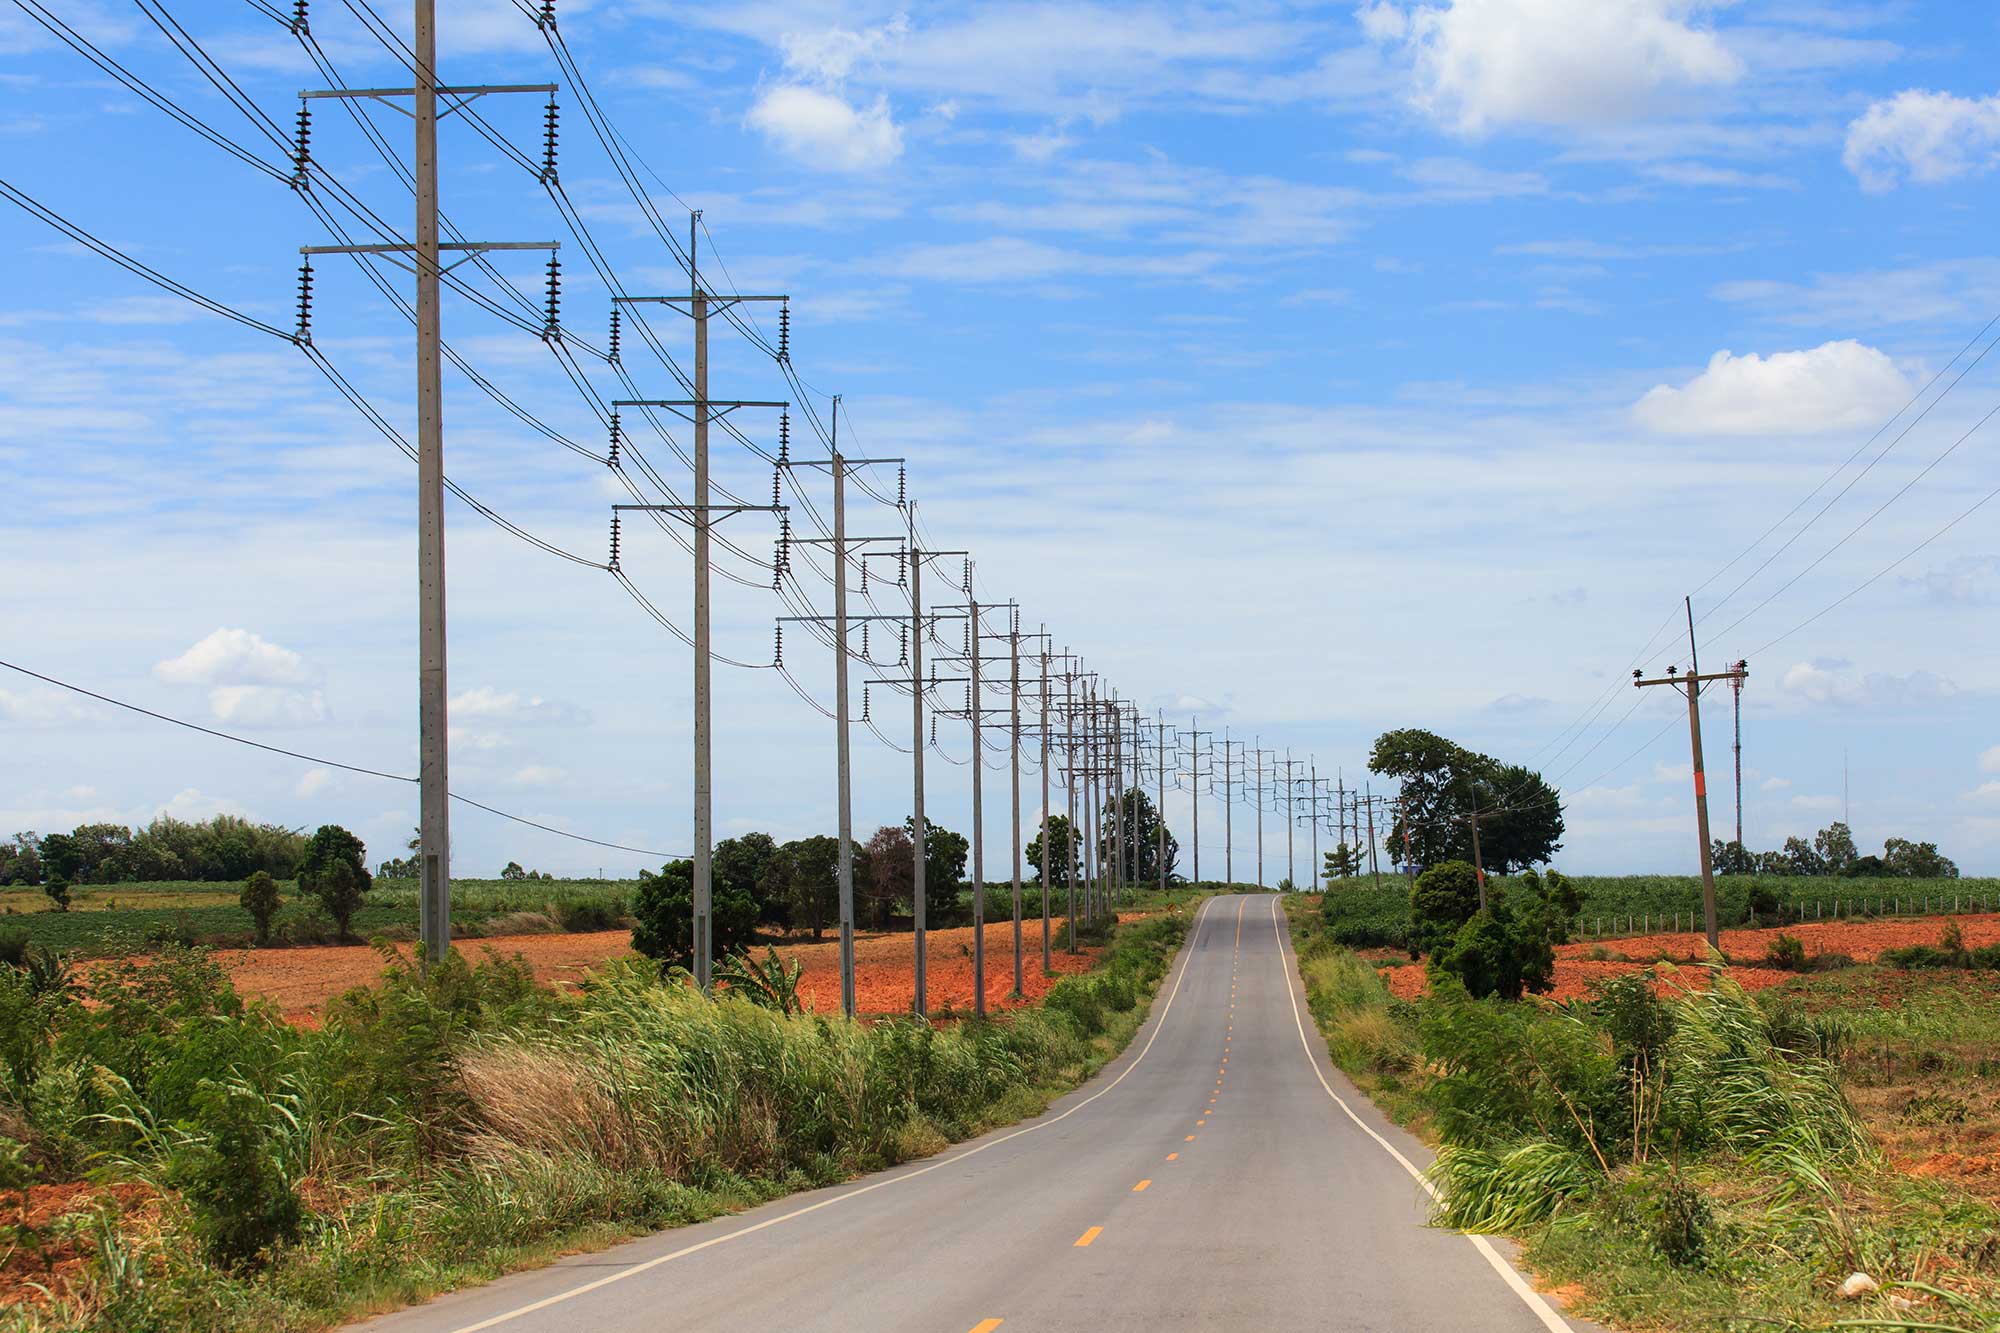 USDA ushers in plans for improved electric service in 13 states AGDAILY